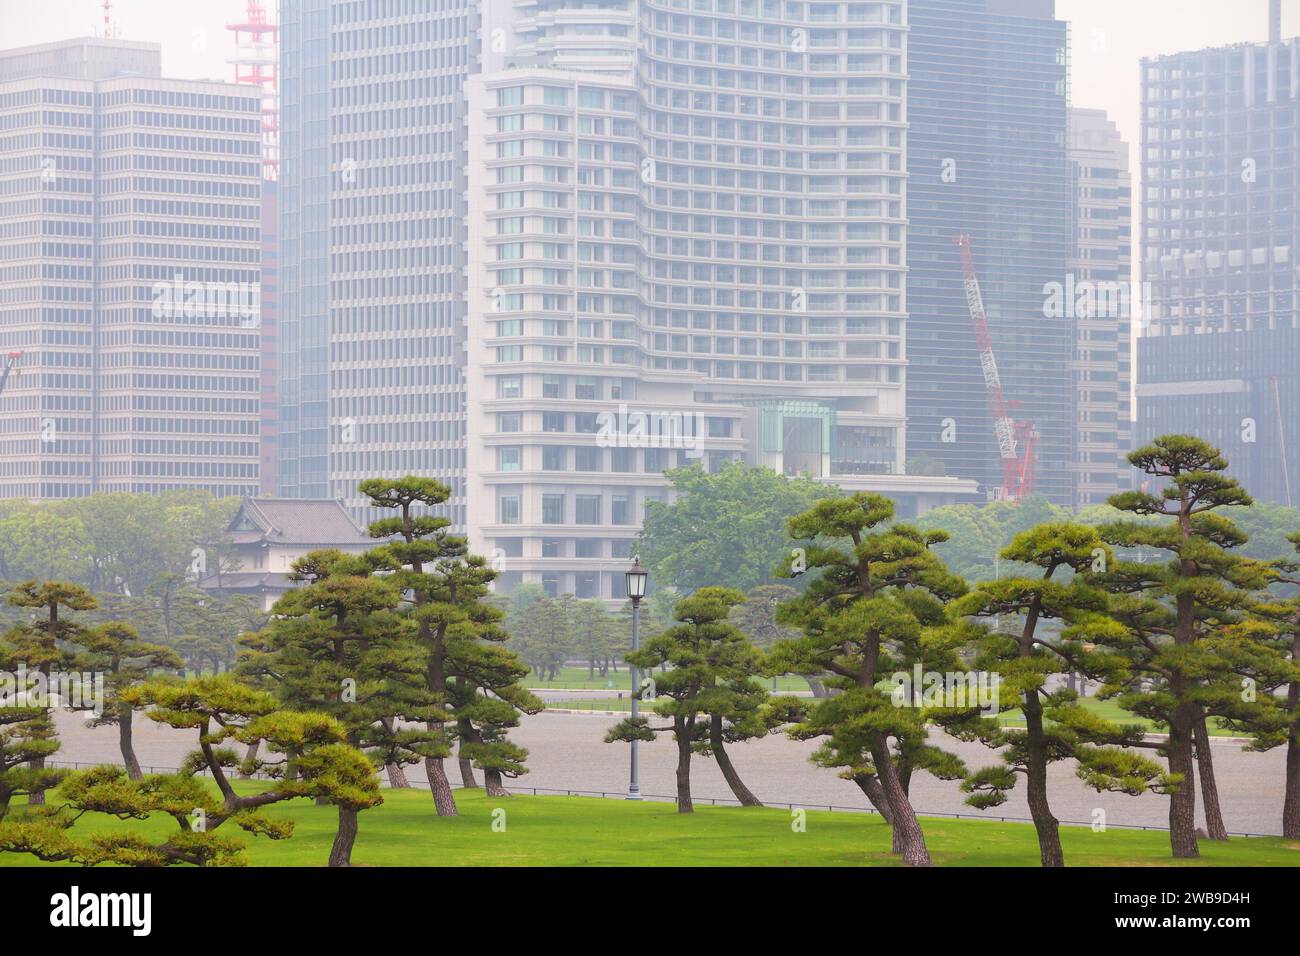 Tokyo city, Japan. Imperial Palace gardens and the urban pollution smog. Hazy air, low visibility. Stock Photo